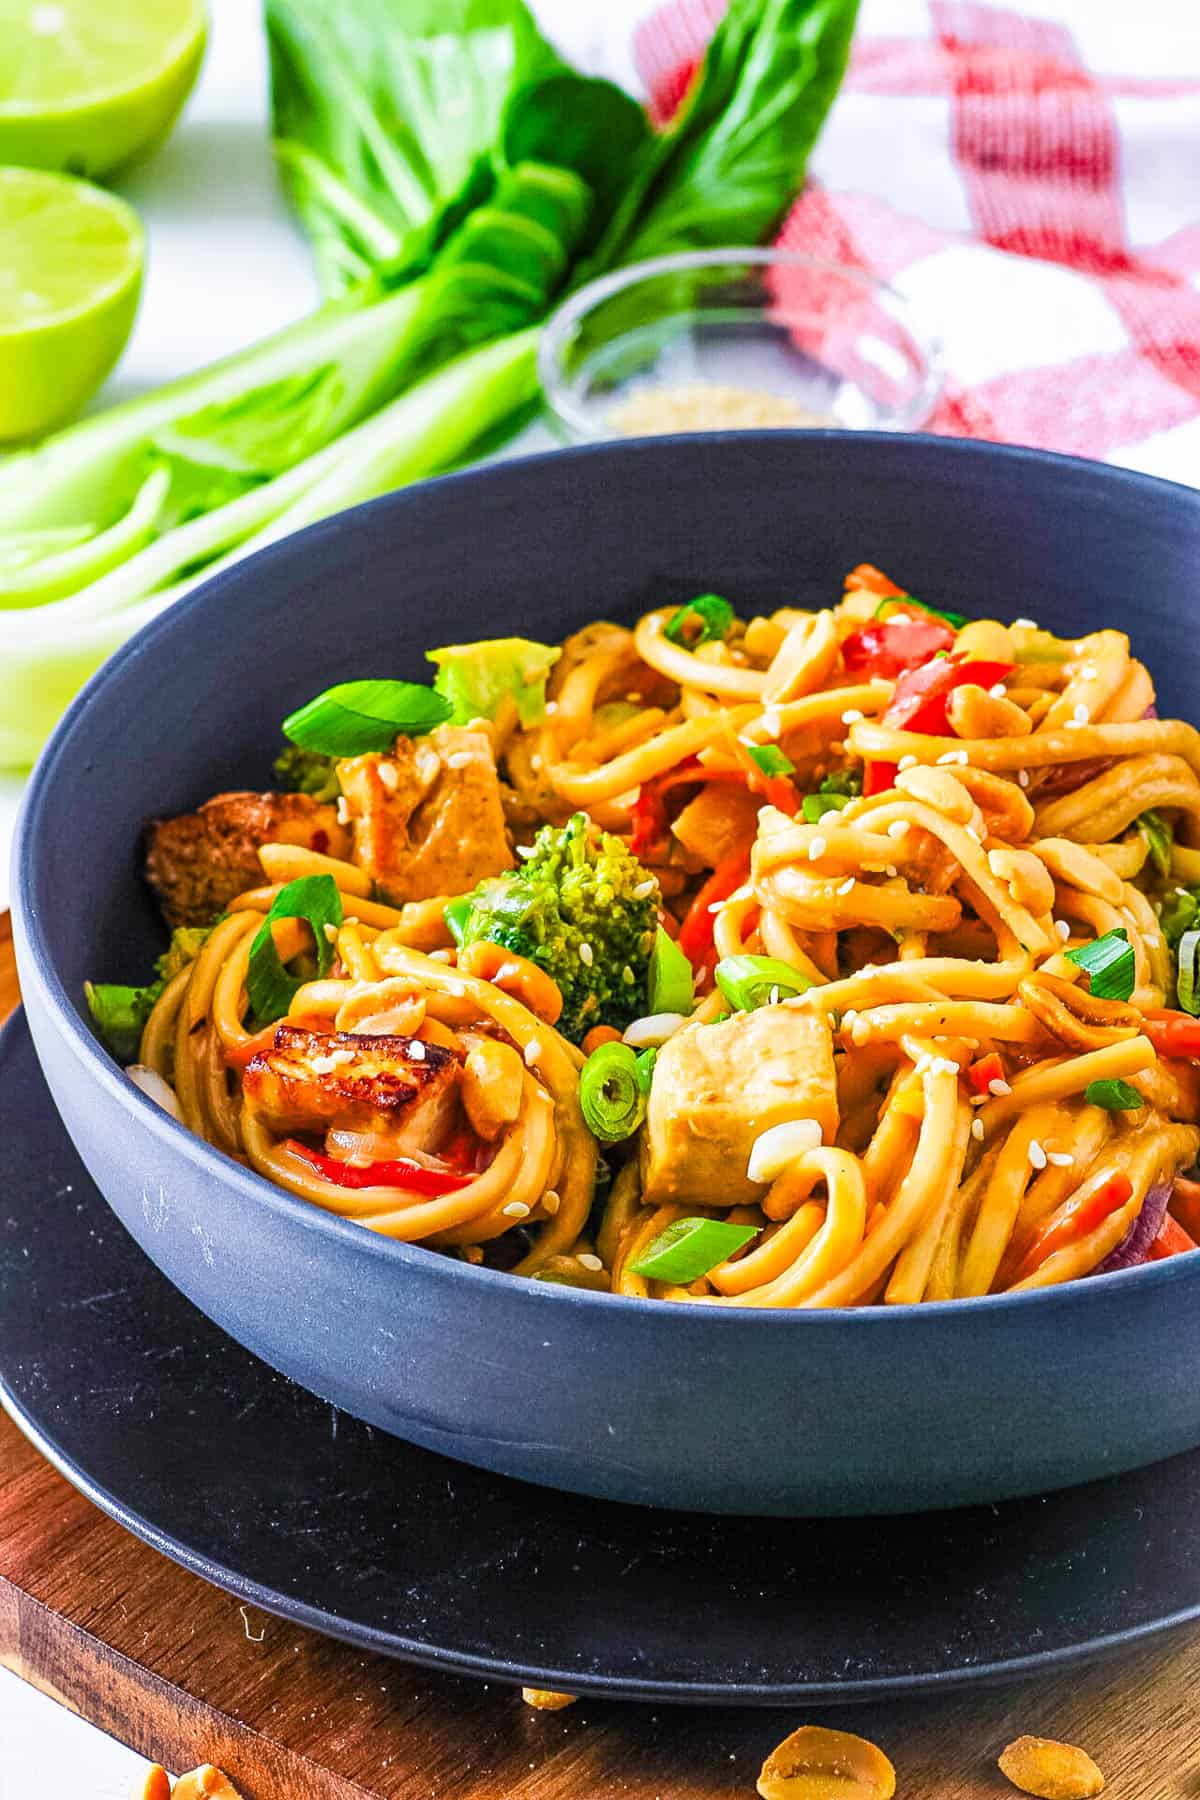 Vegan peanut noodles tossed with veggies and tofu in a bowl.